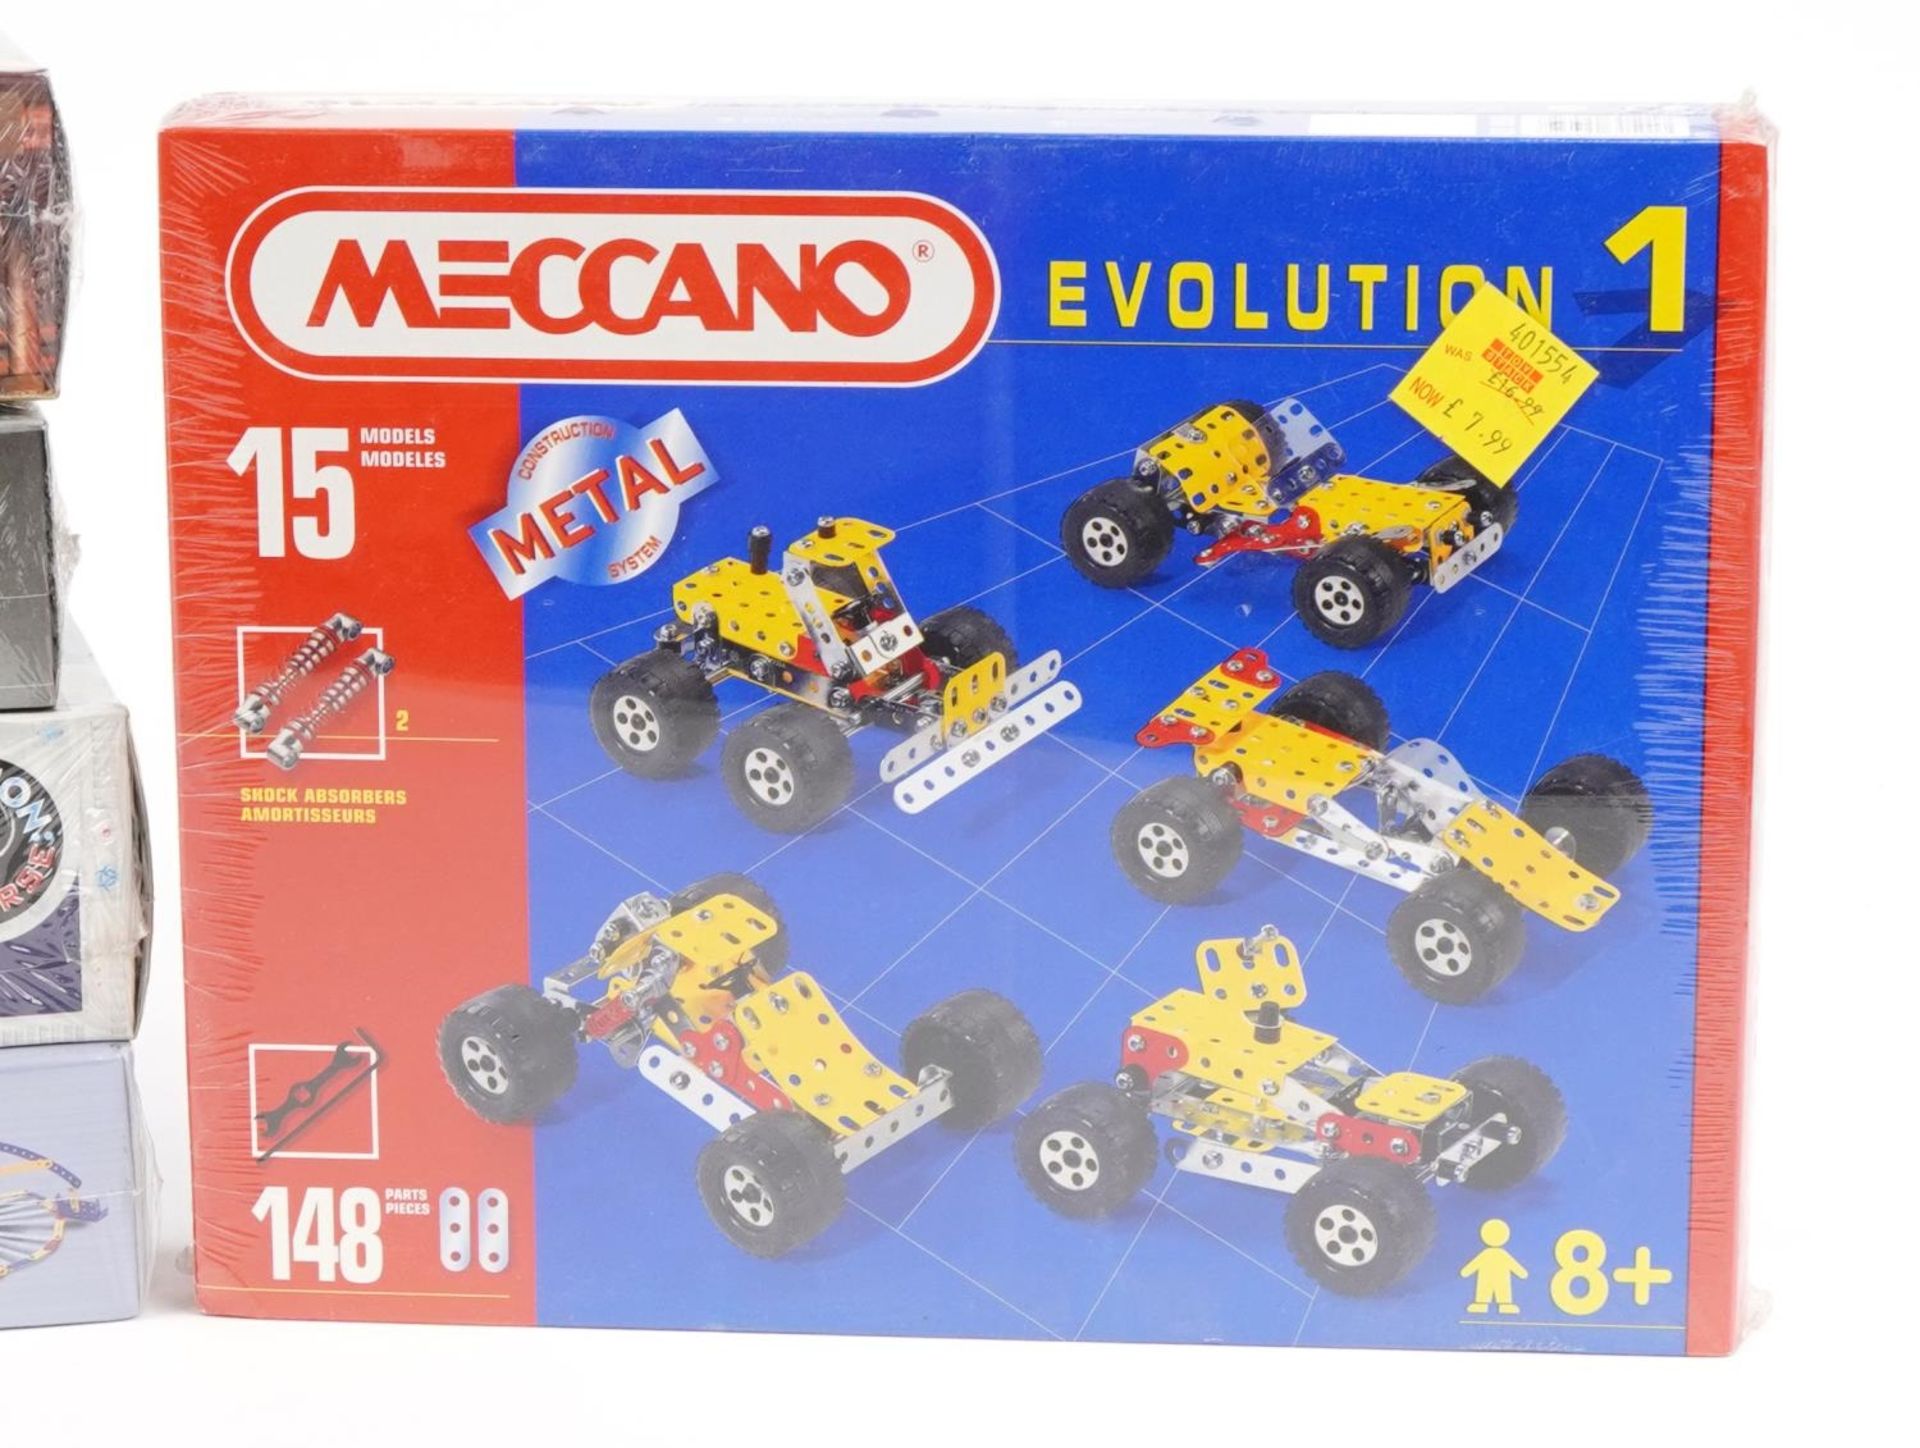 Ten as new Meccano construction sets including numbers 0050, 4840, 4850 and 5650 : For further - Image 4 of 4